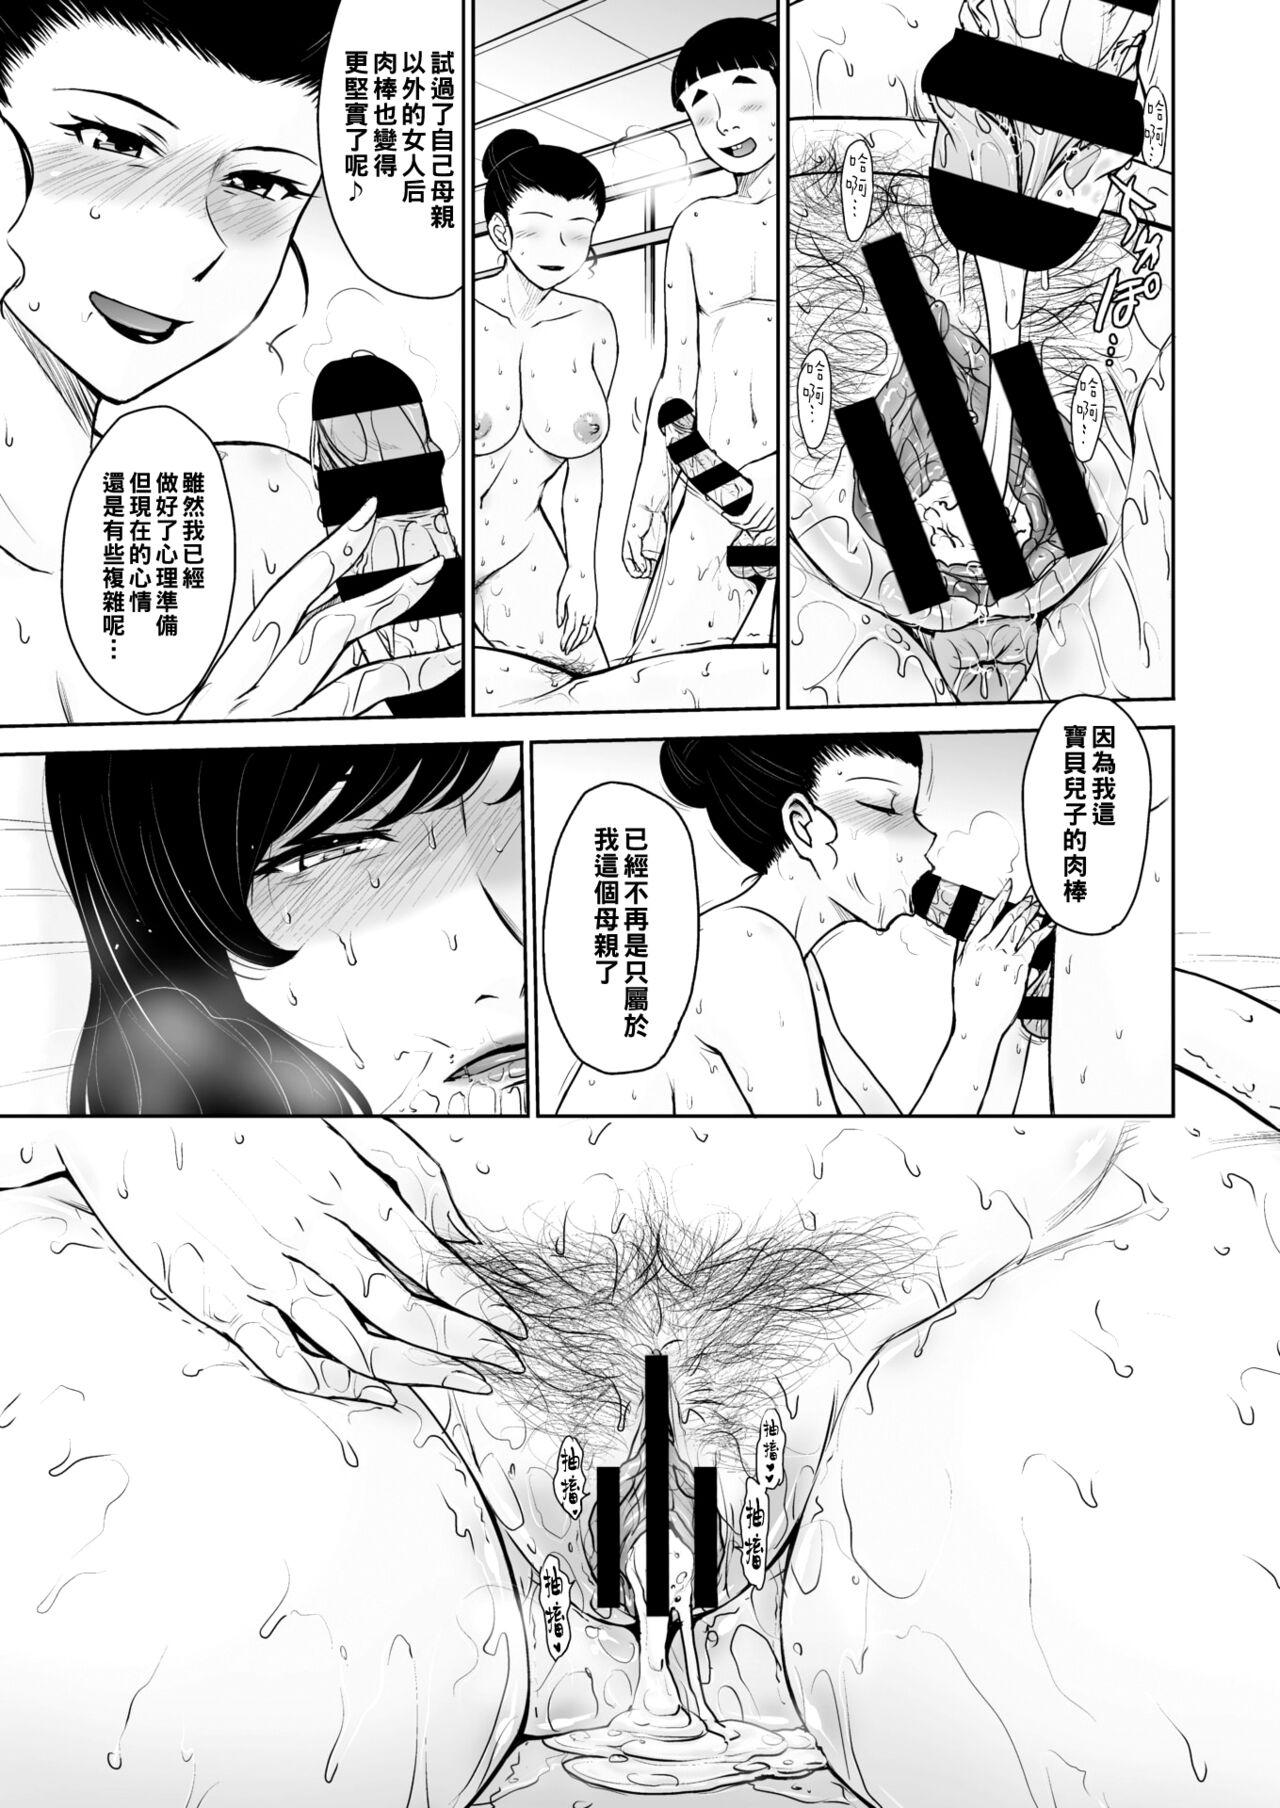 Cut 因習の虜2（Chinese） Messy - Page 3